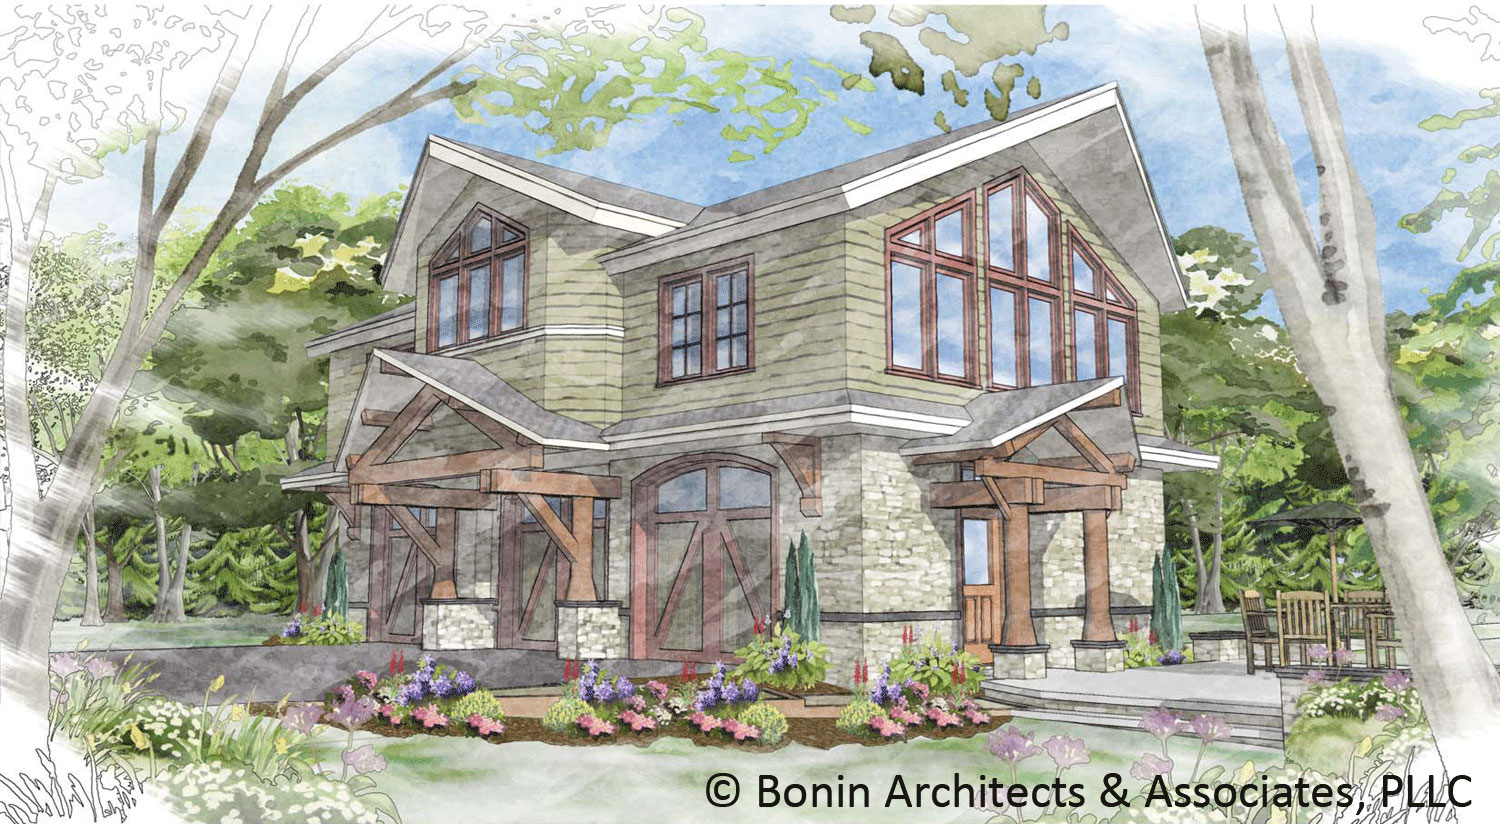 This carriage house design will be used as a guest house on a large  title=